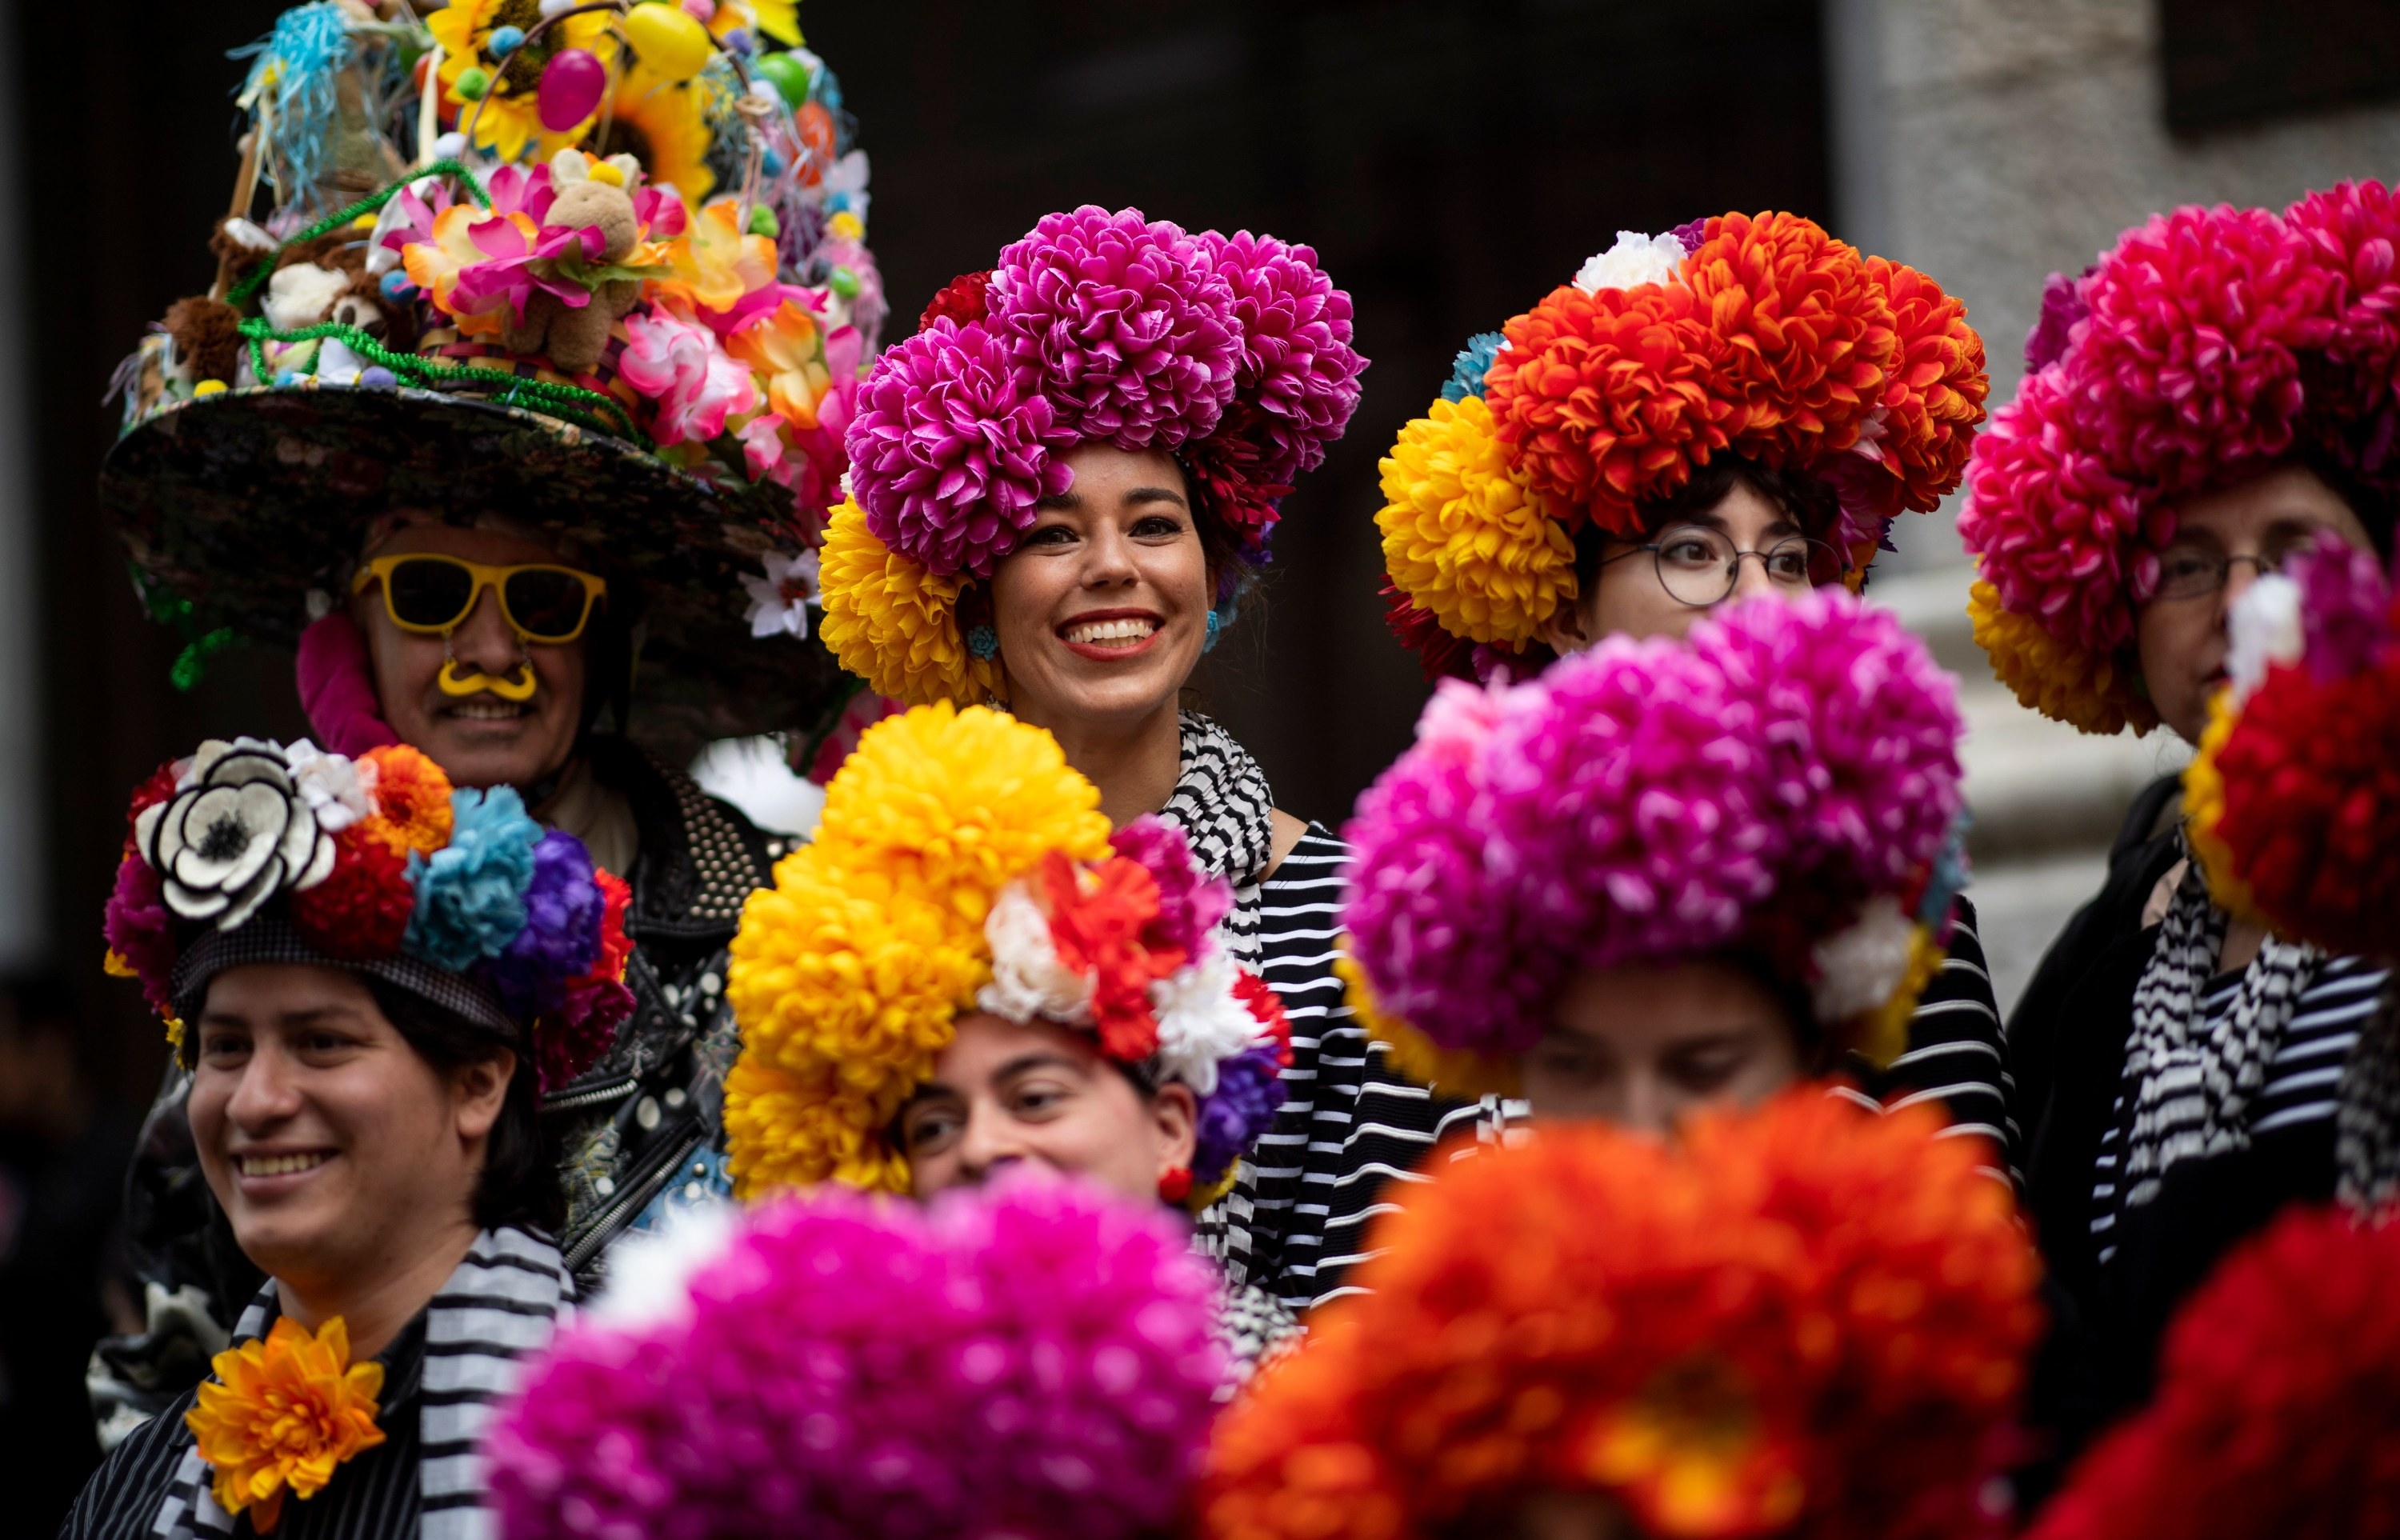 Smiling people with hats covered in flowers